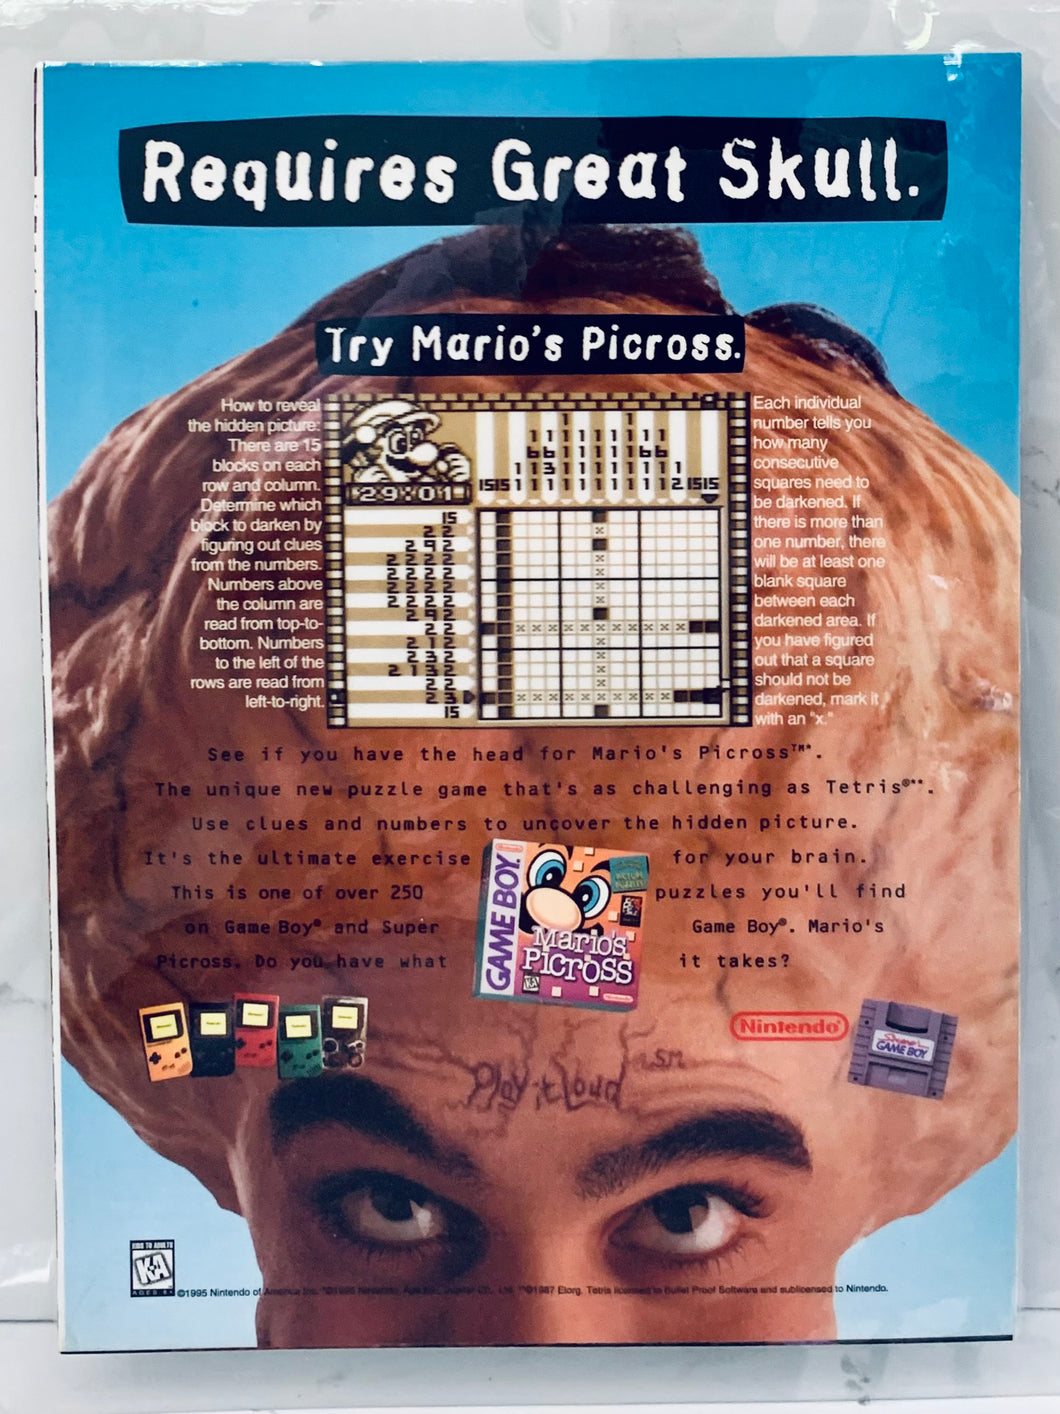 Mario’s Picross - Game Boy GB - Original Vintage Advertisement - Print Ads - Laminated A4 Poster